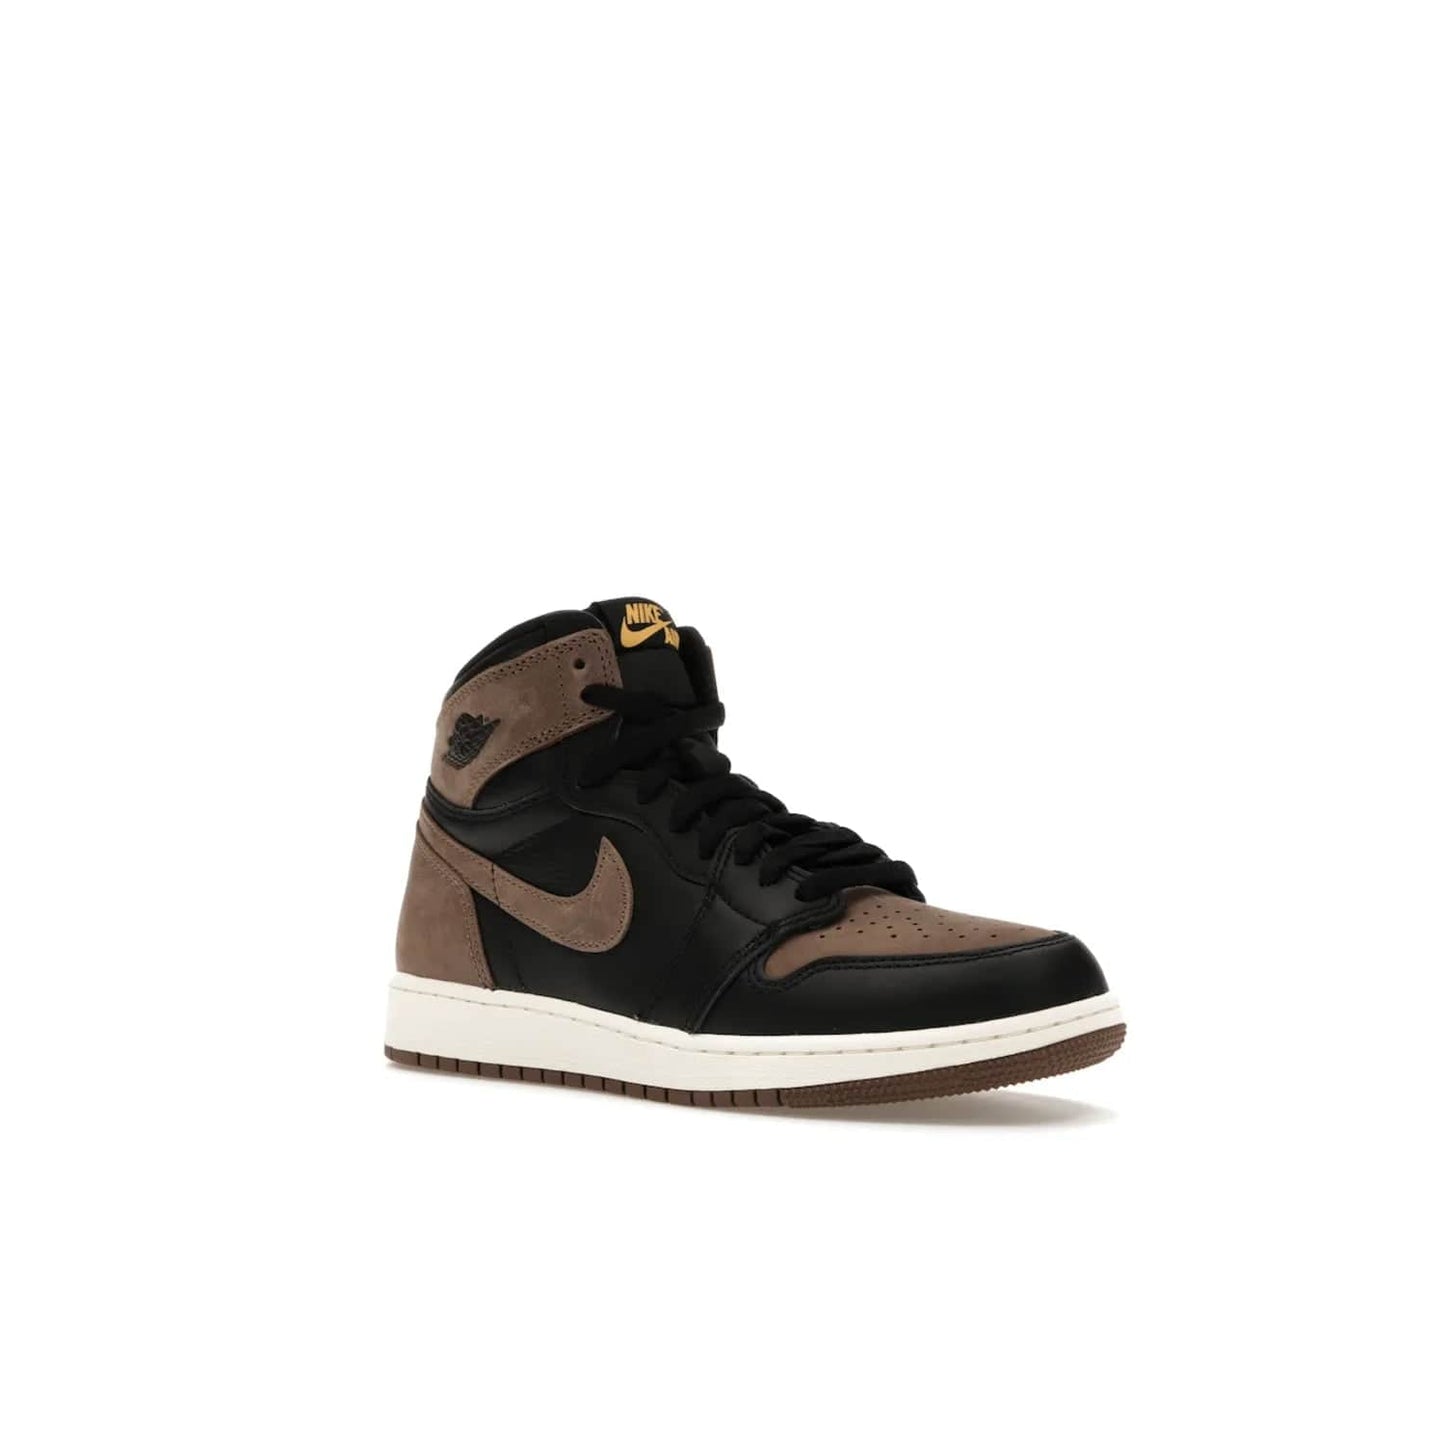 Jordan 1 Retro High OG Palomino (GS) - Image 5 - Only at www.BallersClubKickz.com - Introducing the luxurious Jordan 1 Retro High OG Palomino (GS). Featuring black leather with metallic gold and palomino accents, this sneaker is perfect for any occasion. Grab yours when they release on September 2nd of 2023.